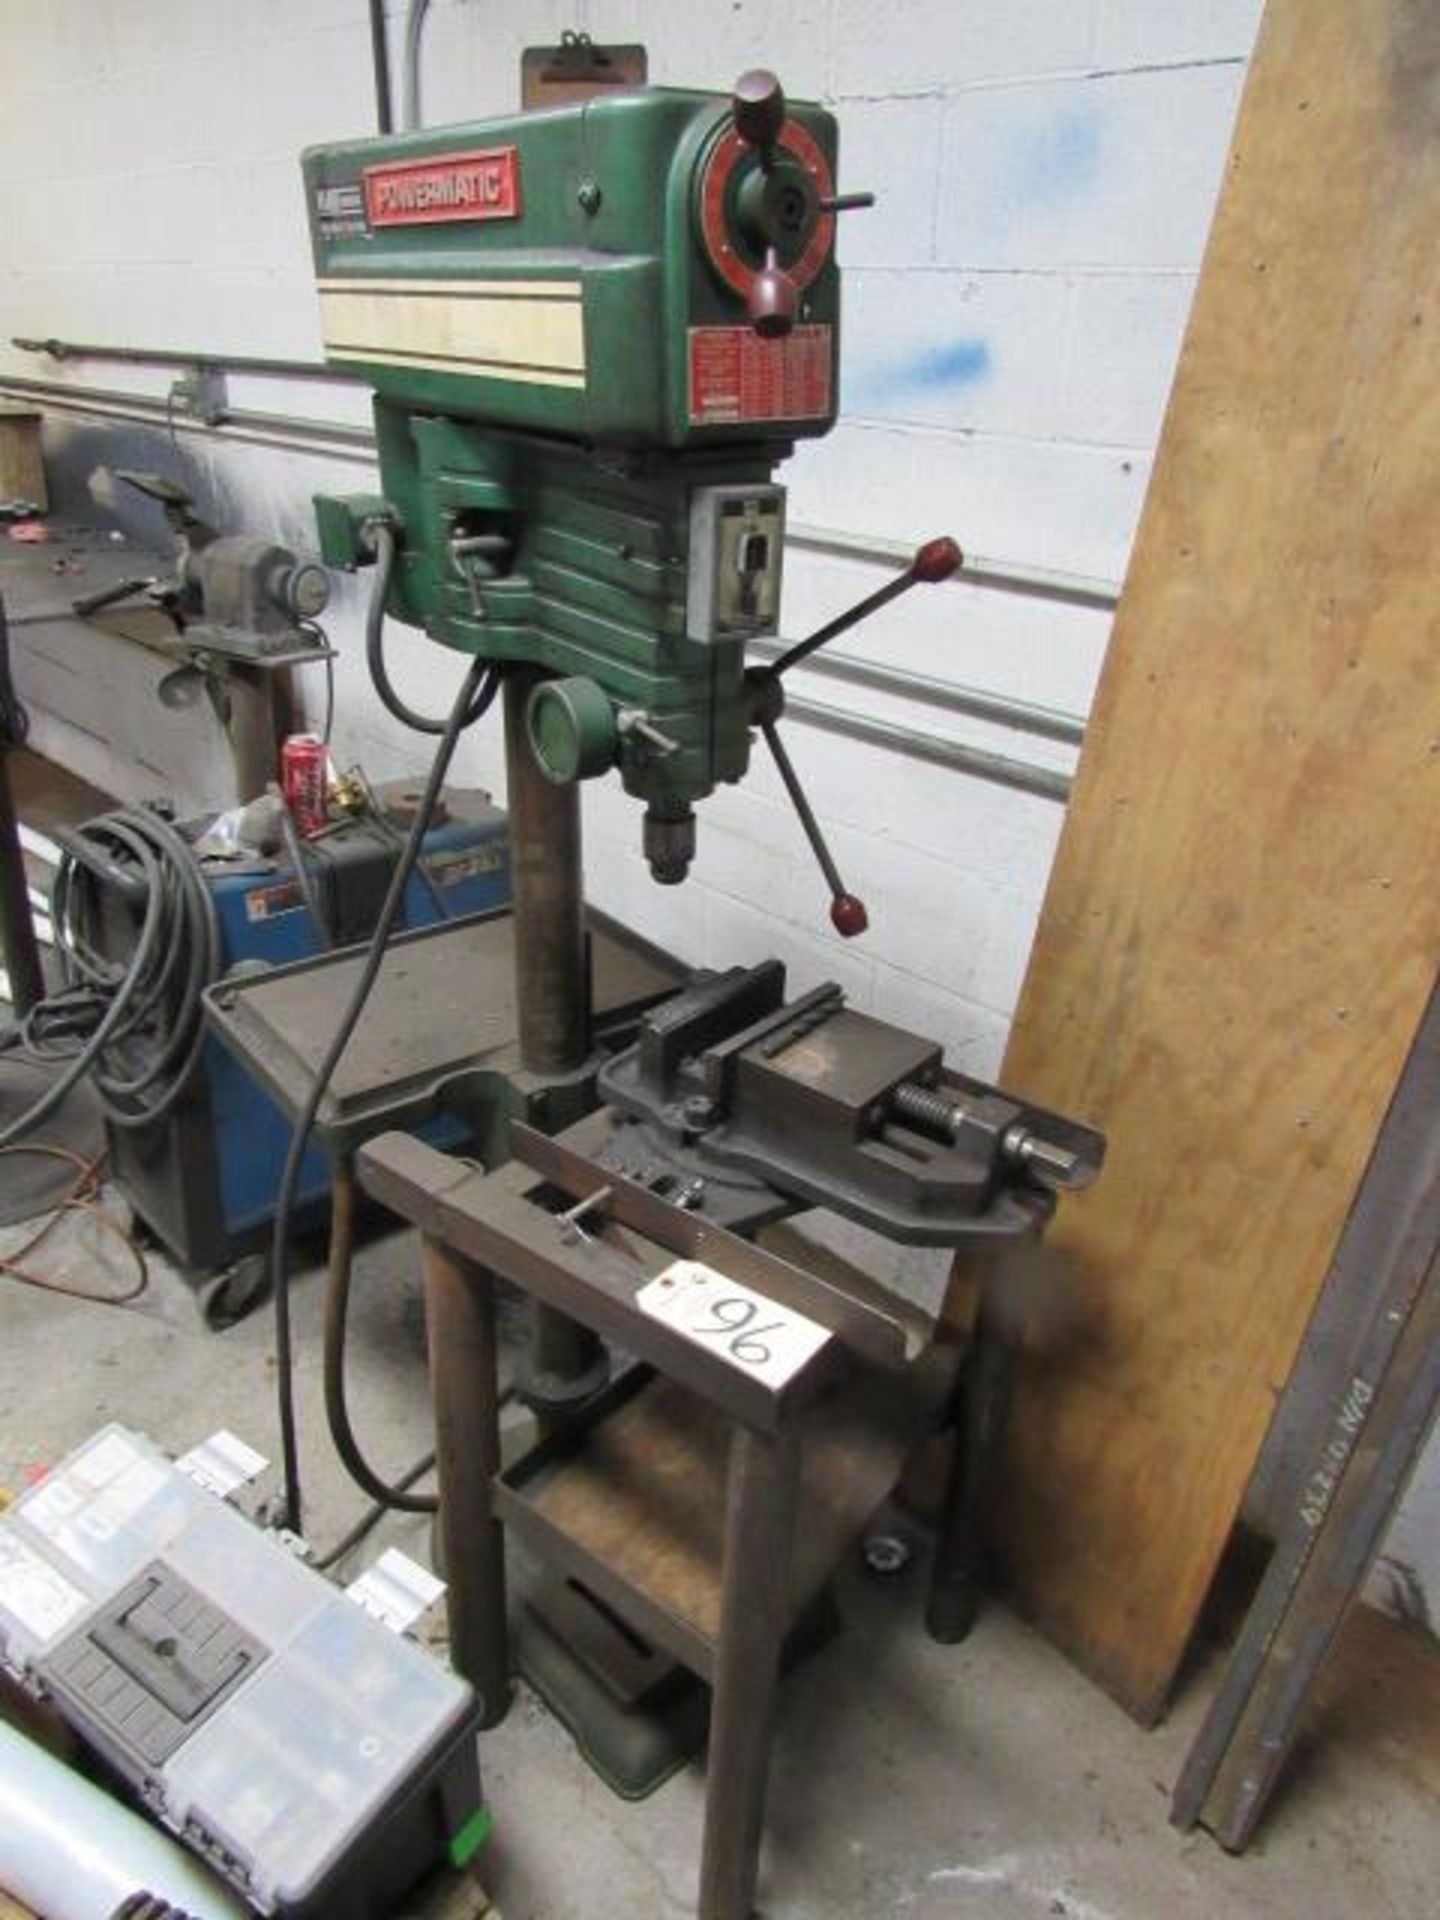 Powermatic 1150 16'' Drill Press with 4800 RPM, Adjustable Table, sn:115V245